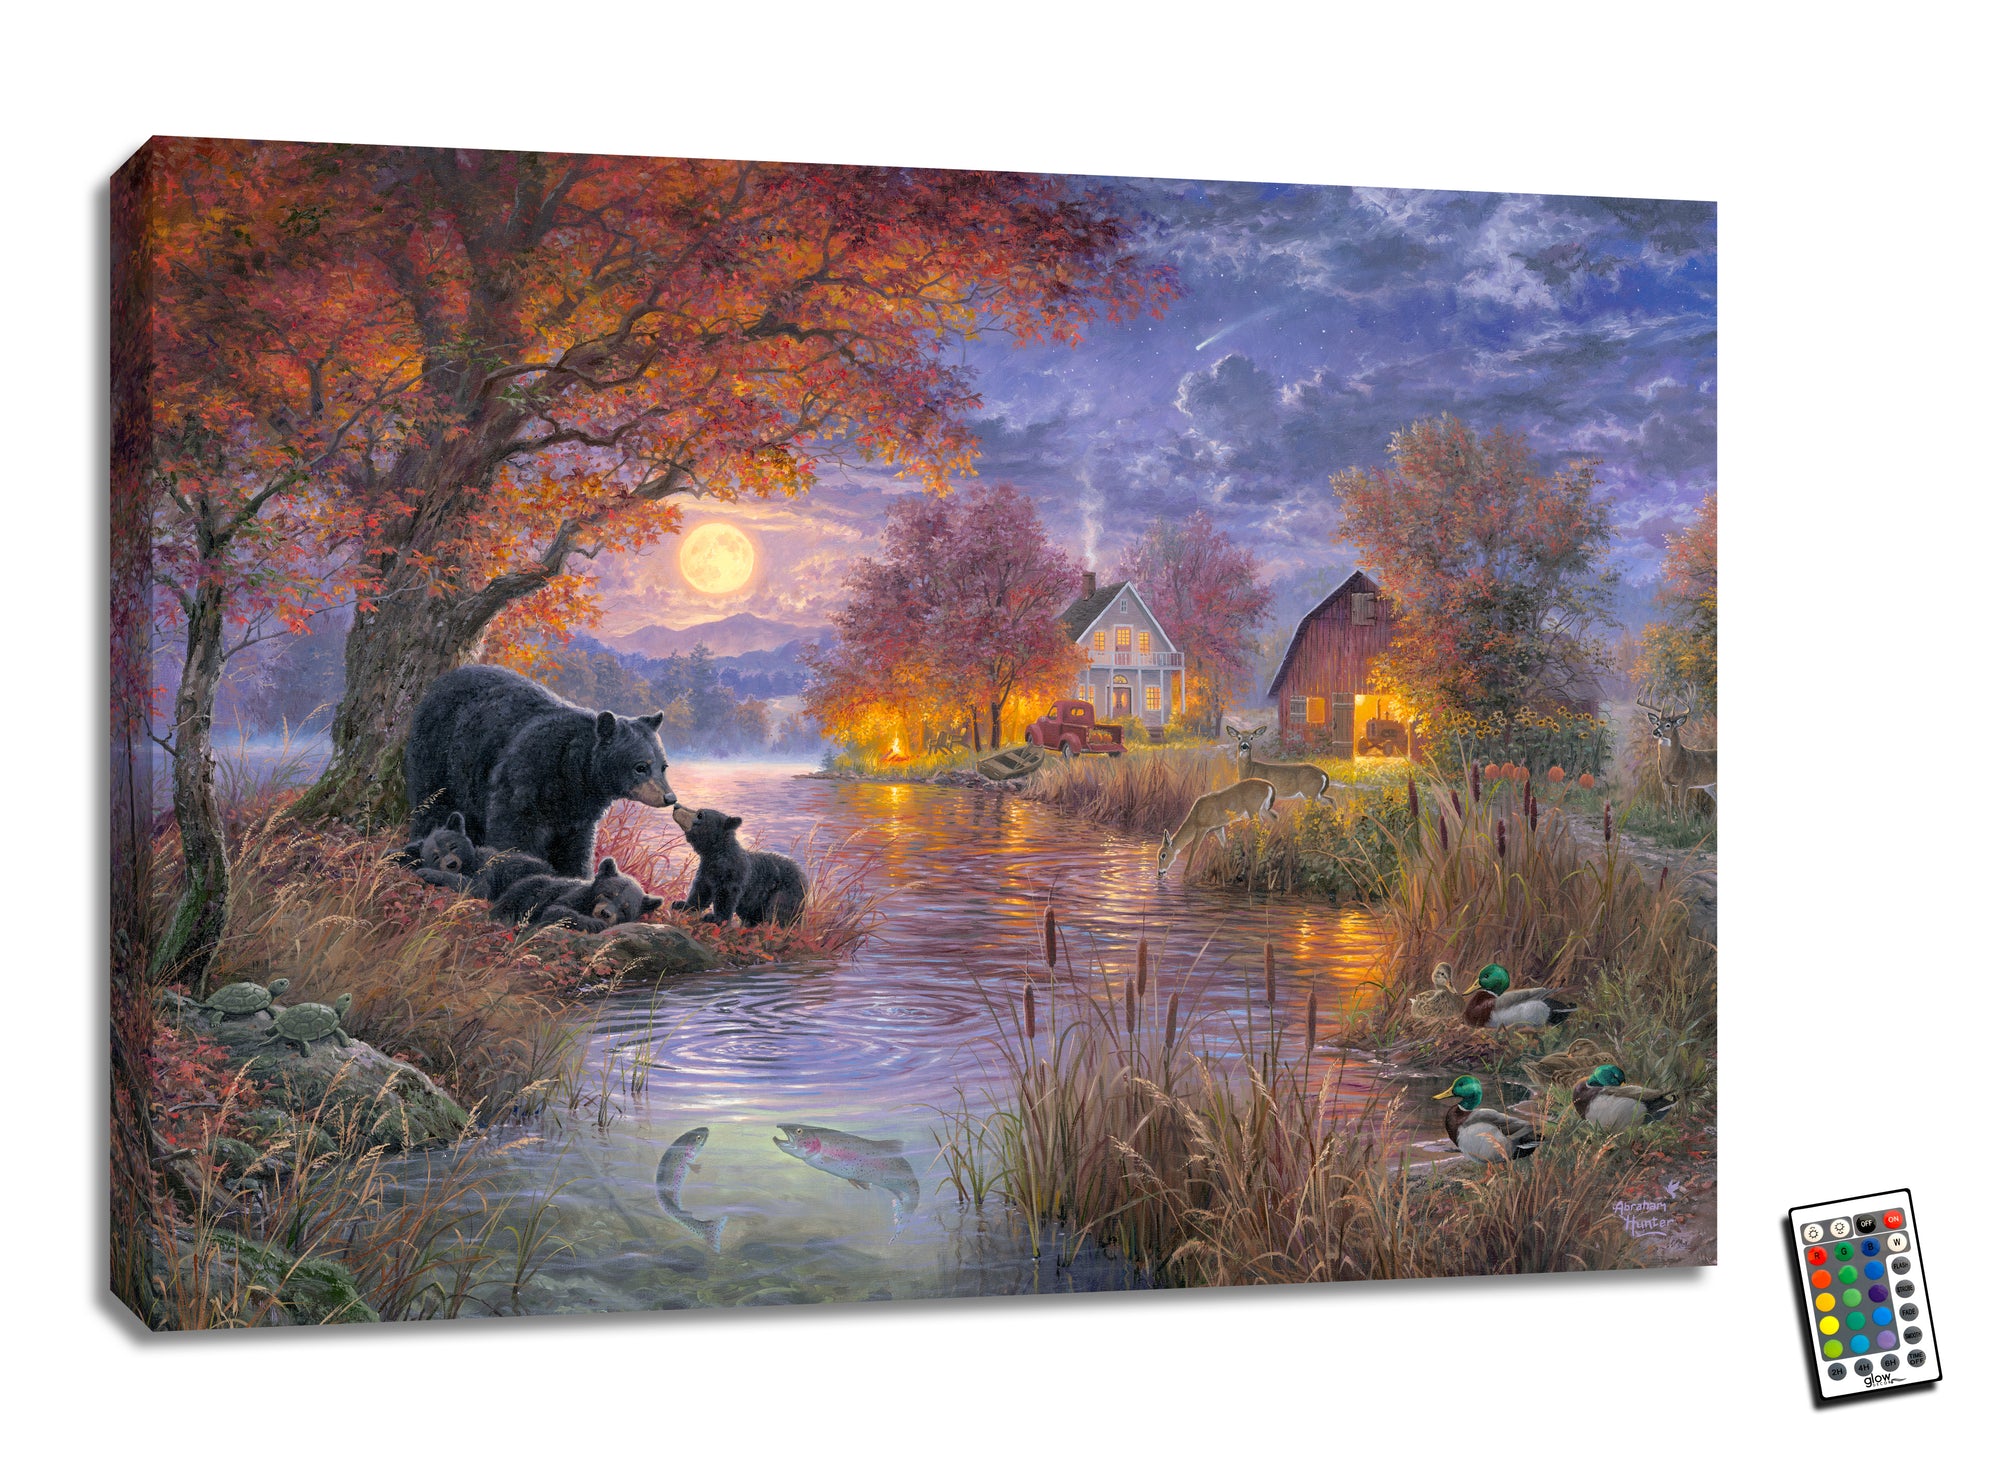 This stunning piece features a black bear family snuggled in for the night by a peaceful stream on a beautiful farm, with a full moon illuminating the sky in the background.